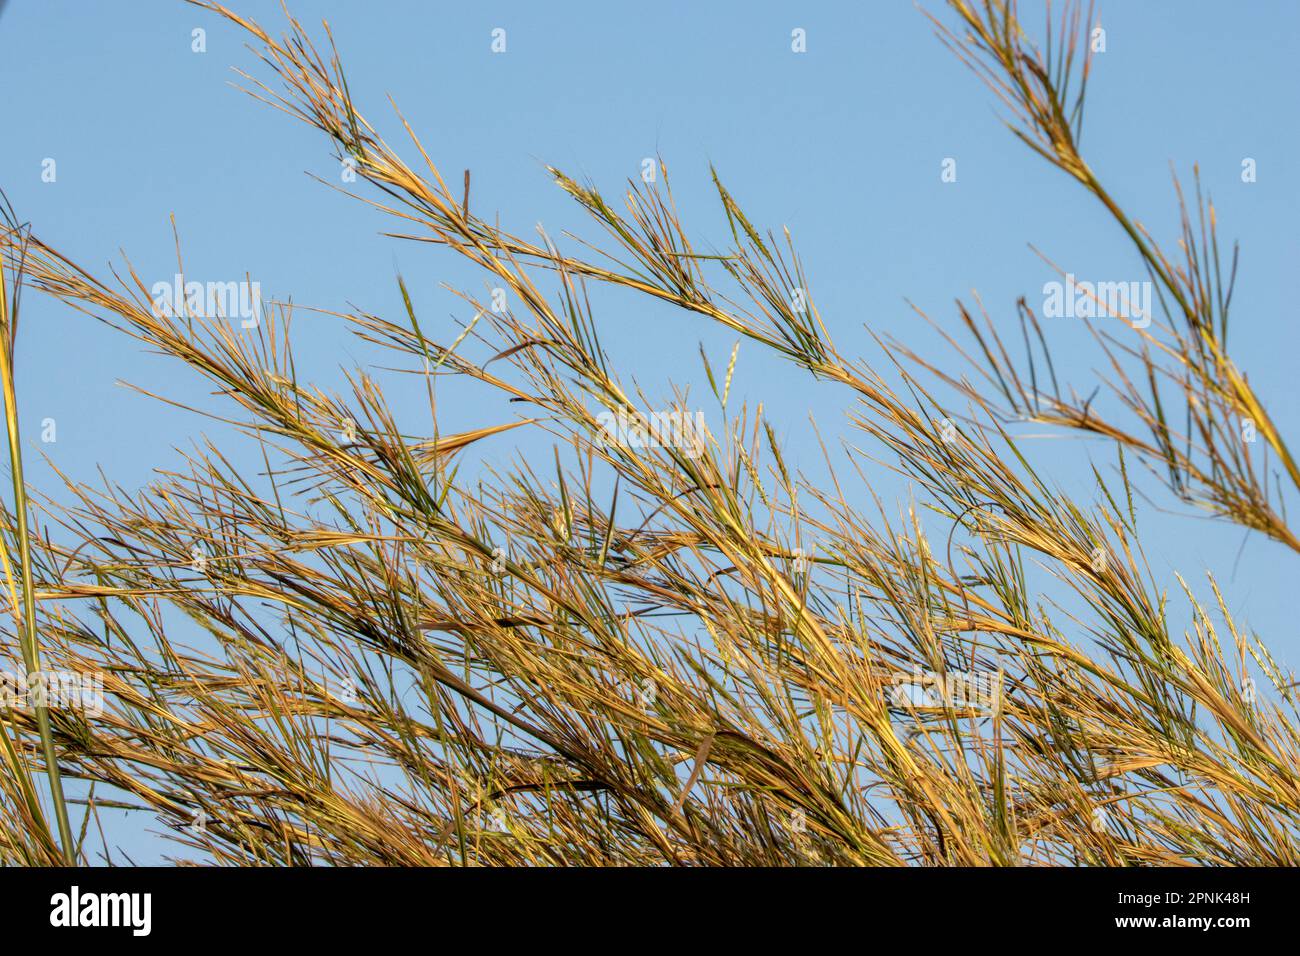 grass waving in the wind with a clear blue sky in West Africa Stock Photo